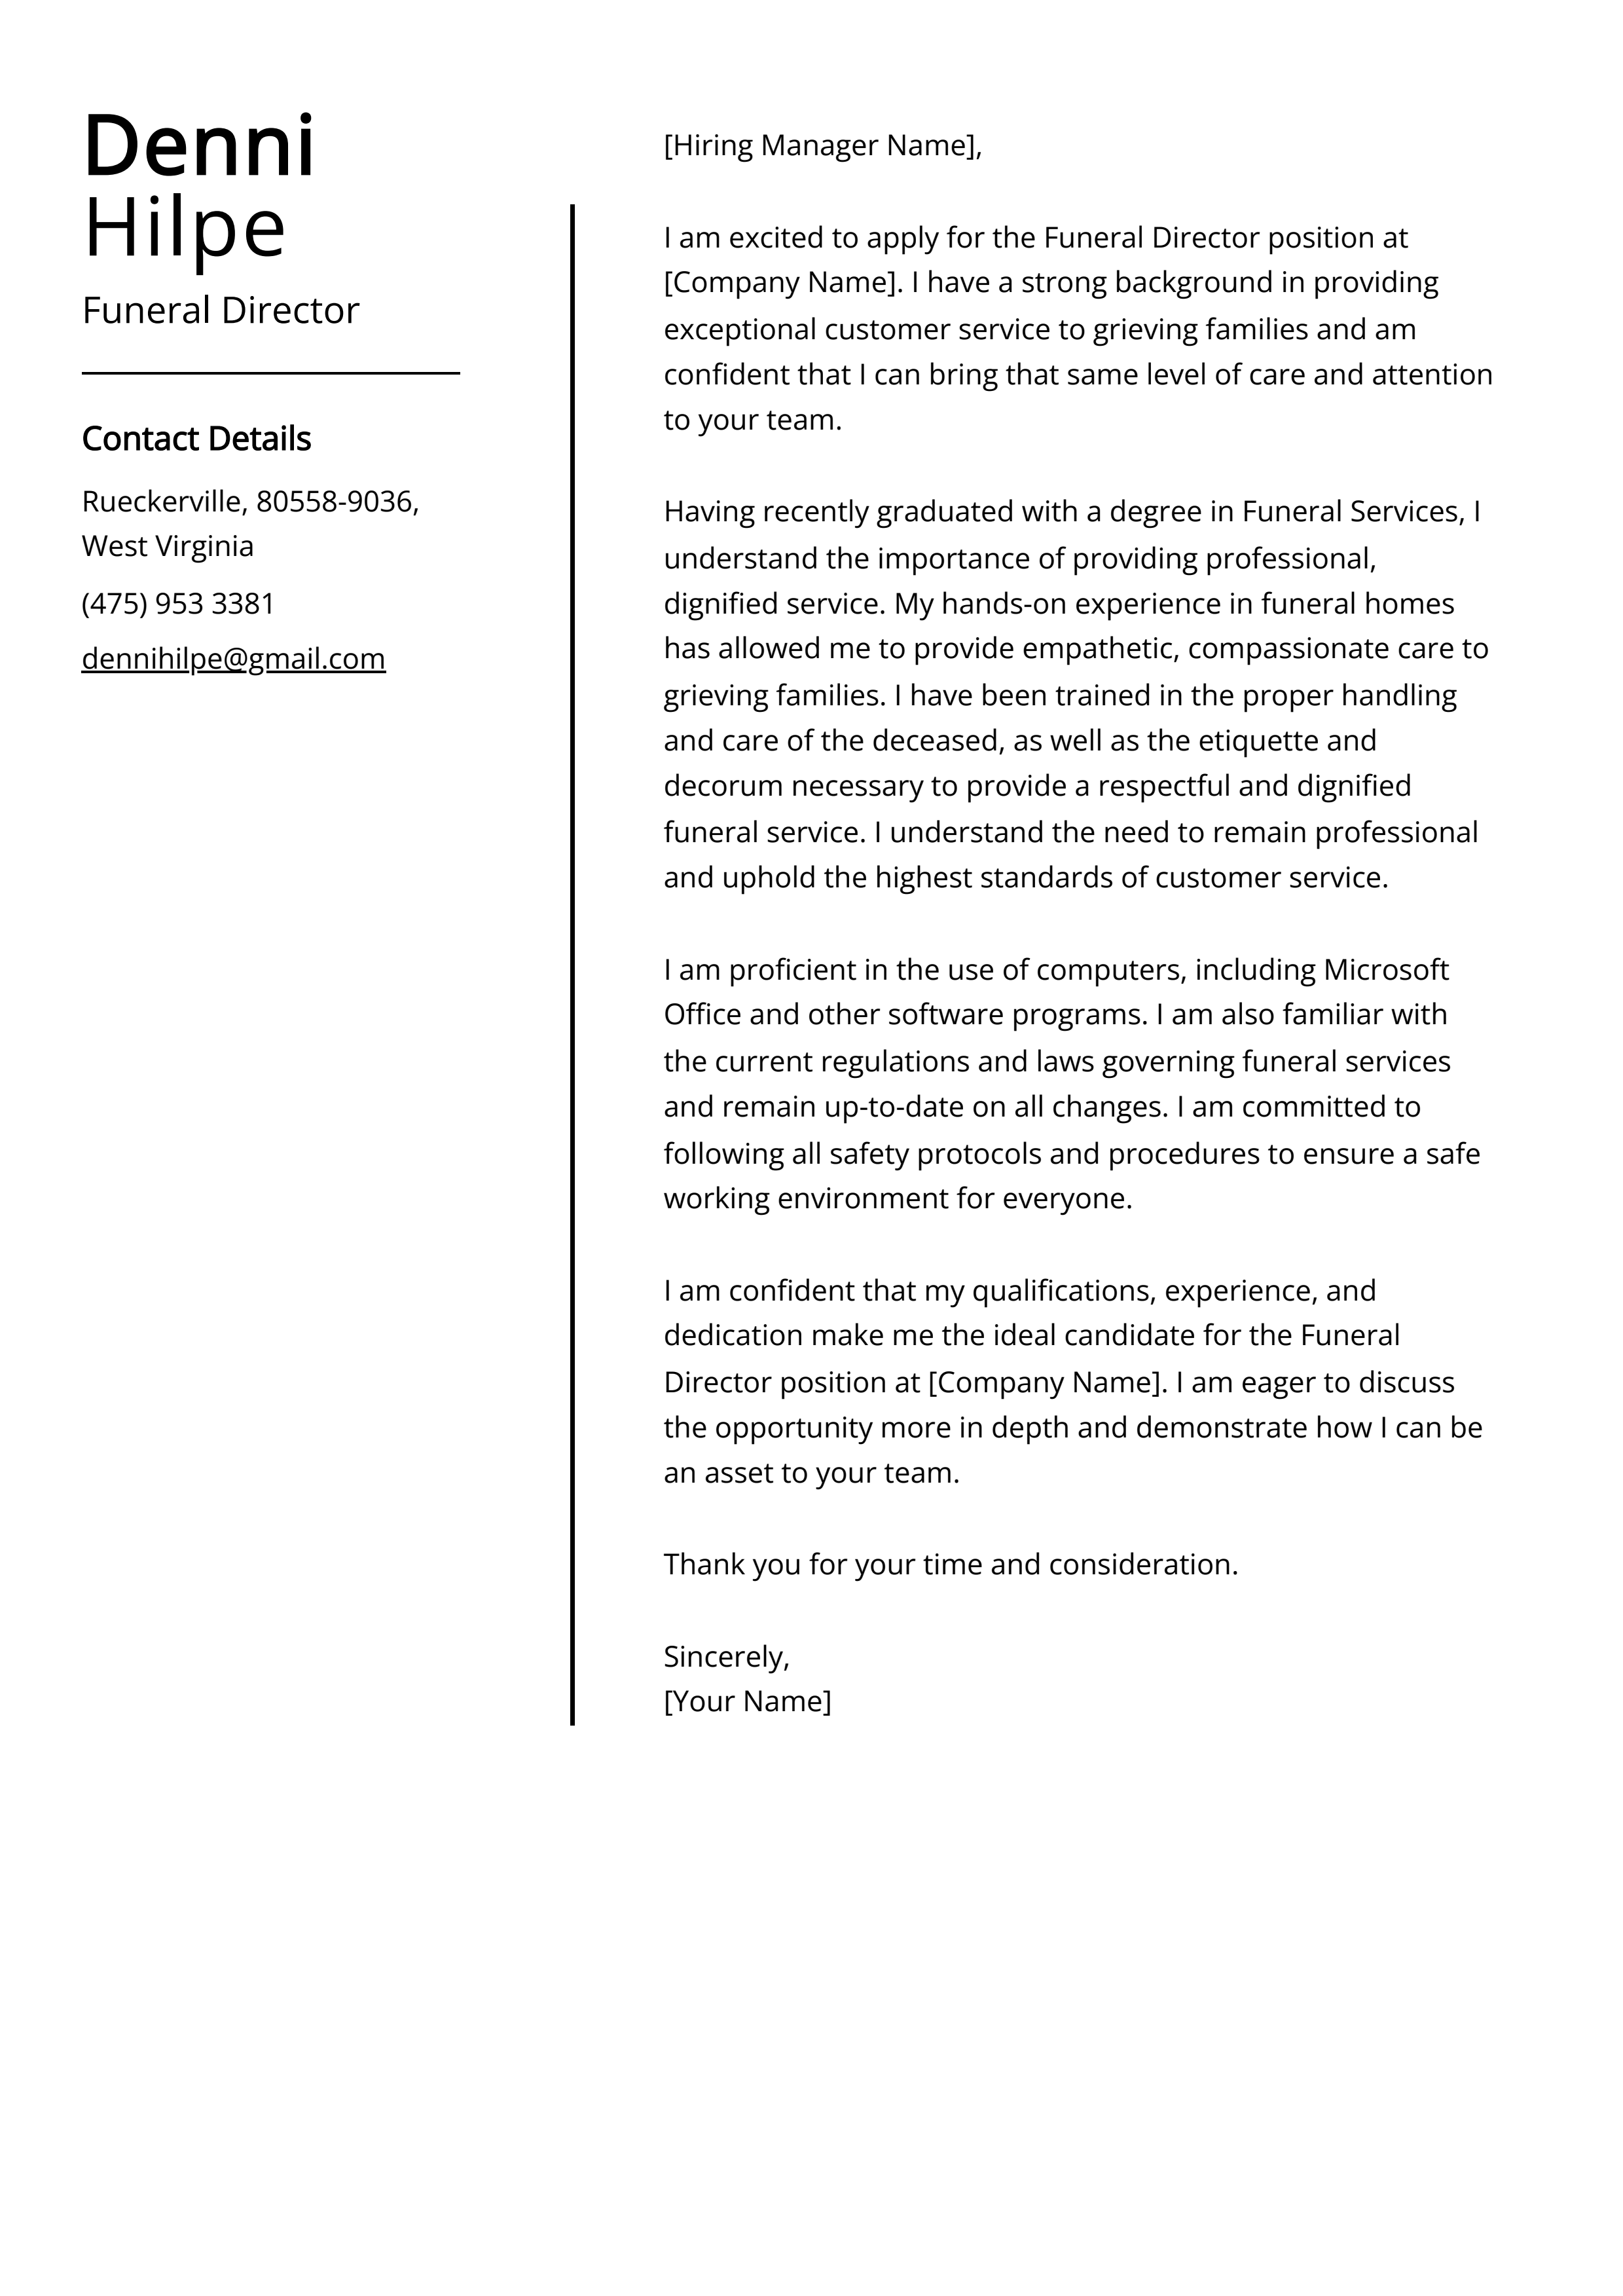 Funeral Director Cover Letter Example